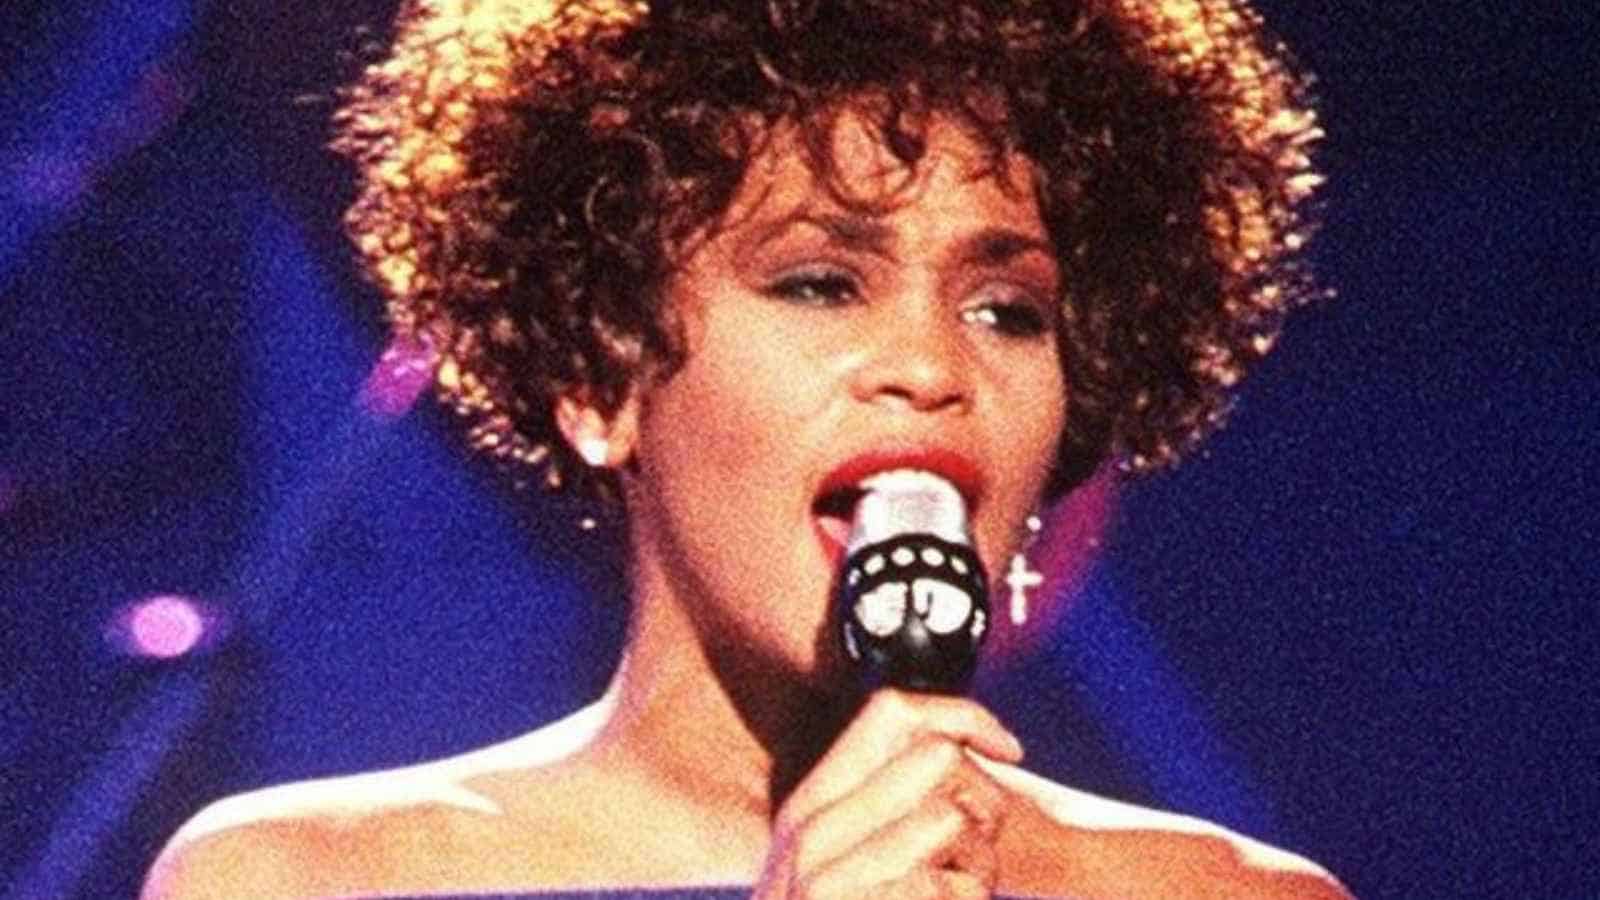 <p>Originally written and recorded by Dolly Parton, this song gained even more popularity when it was covered by Whitney Houston for the movie “The Bodyguard.” The lyrics express deep devotion and promise to always love someone. Houston’s powerful vocals make this song a true love ballad.</p>